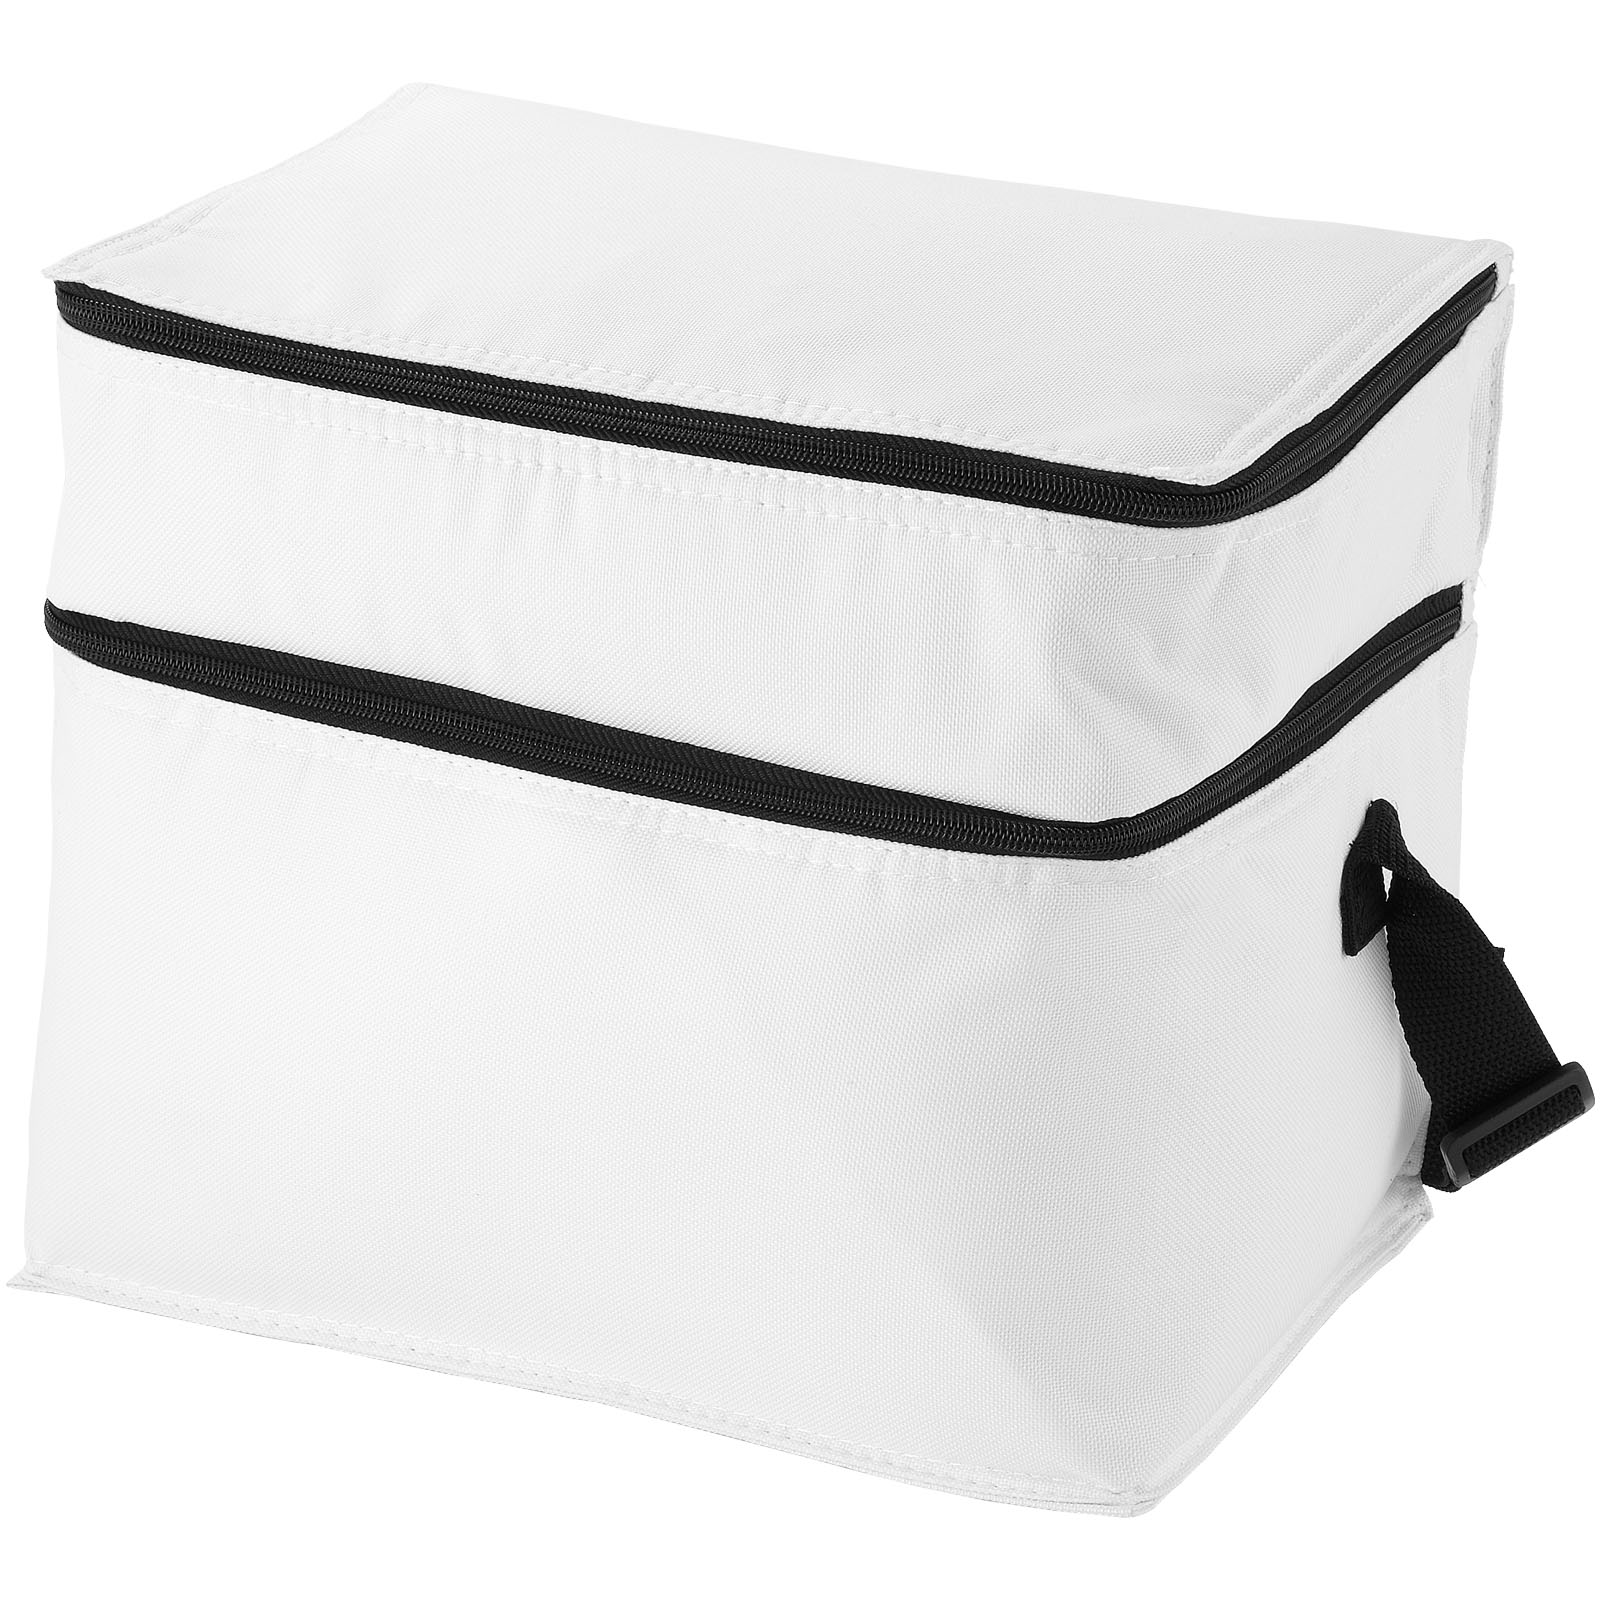 Advertising Cooler bags - Oslo 2-zippered compartments cooler bag 13L - 2